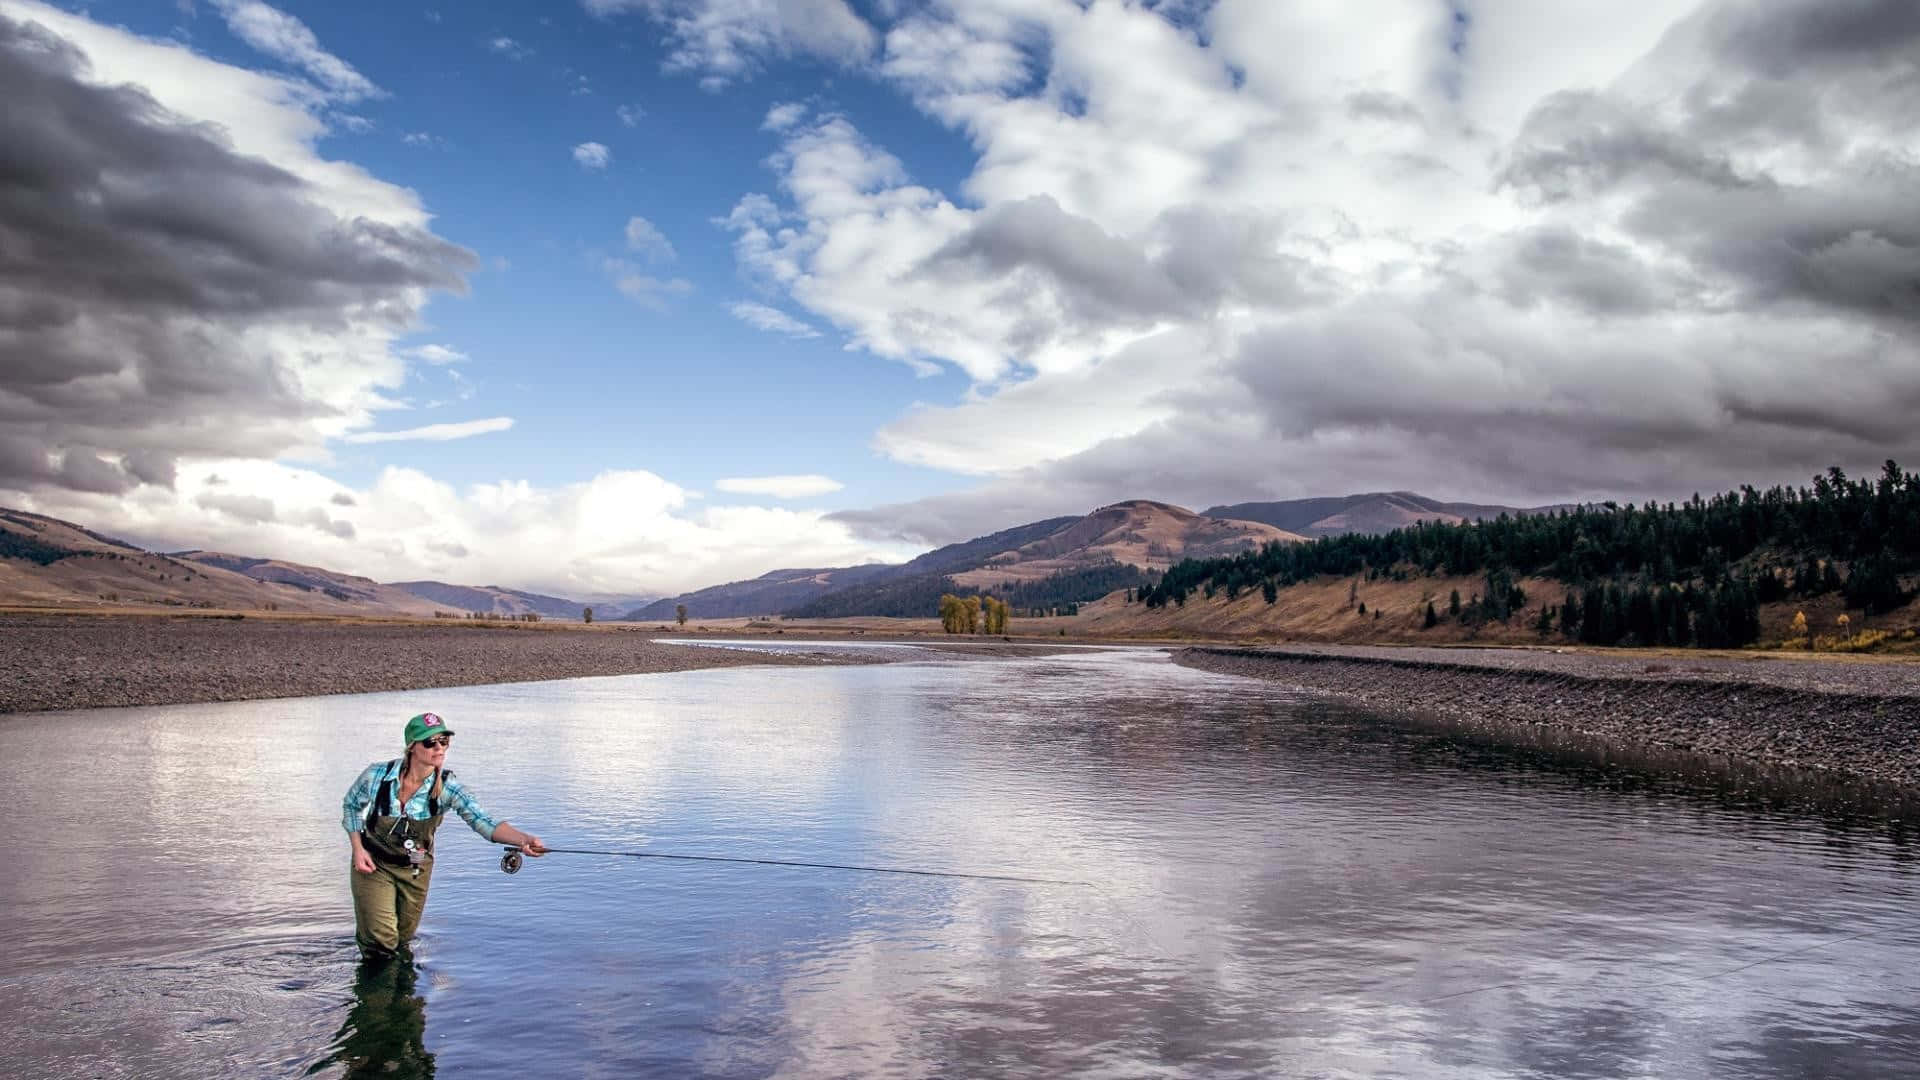 "Casting a Line - Fly Fishing" Wallpaper